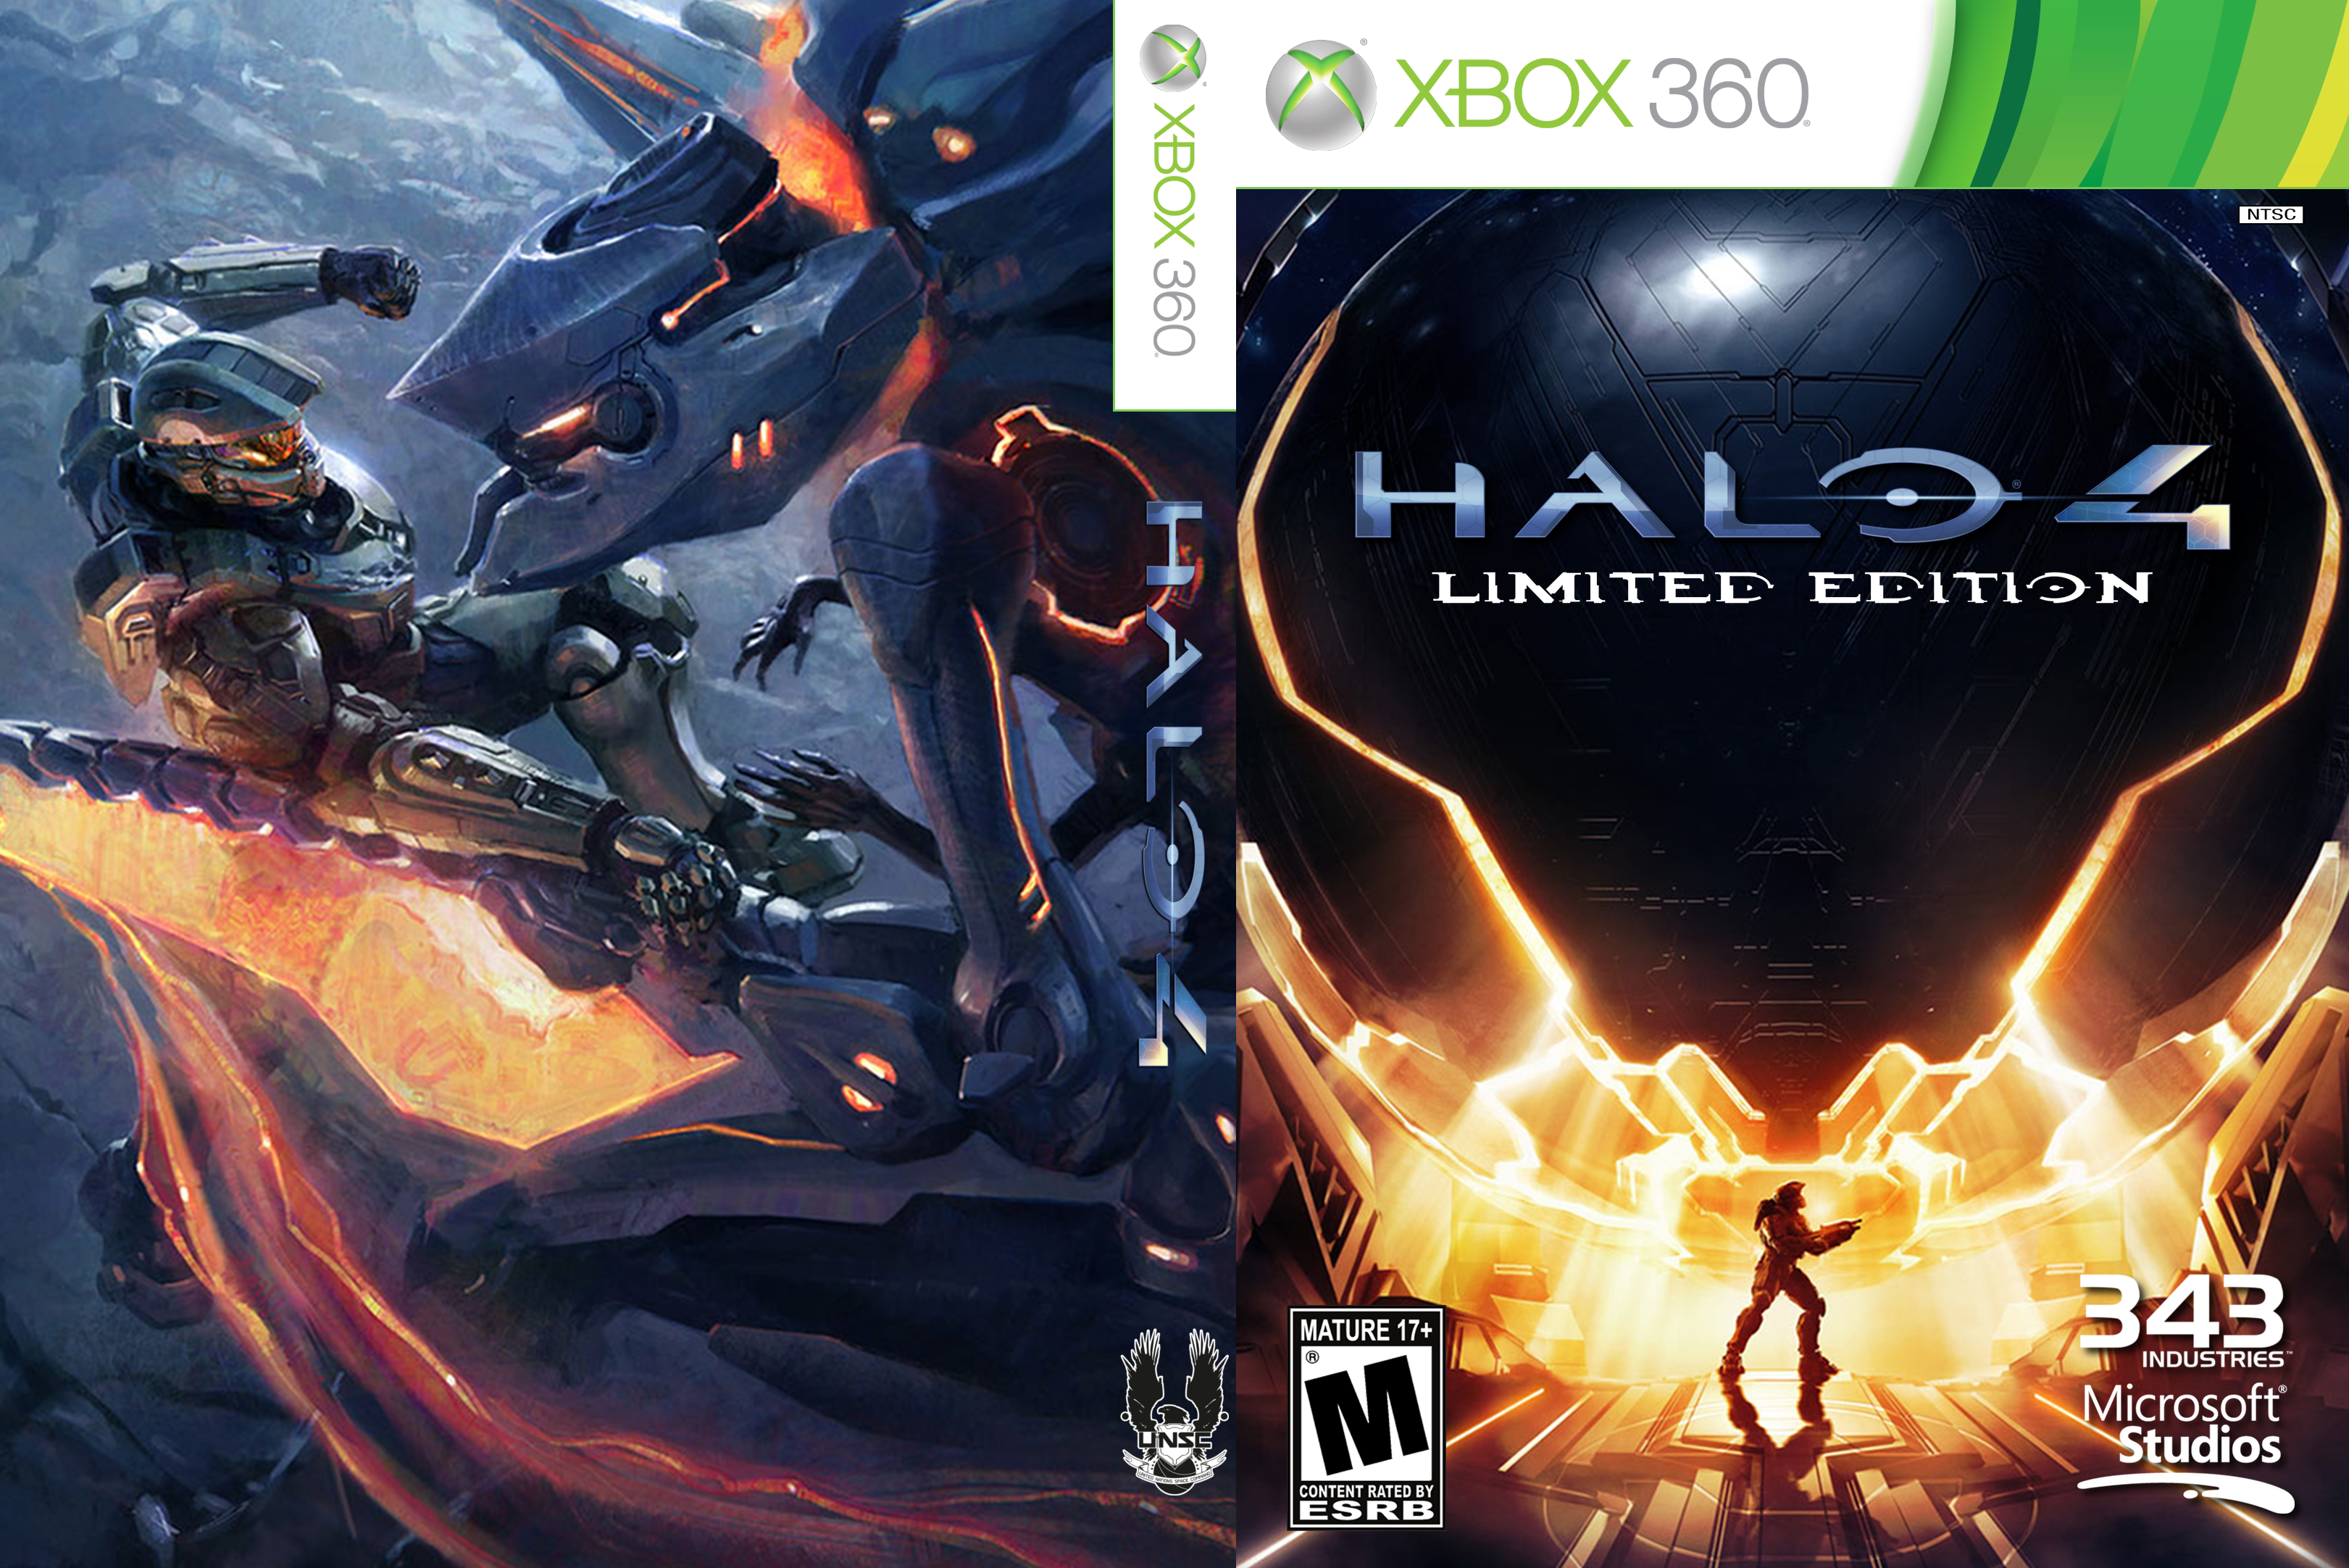 Halo 4: Limited Edition box cover